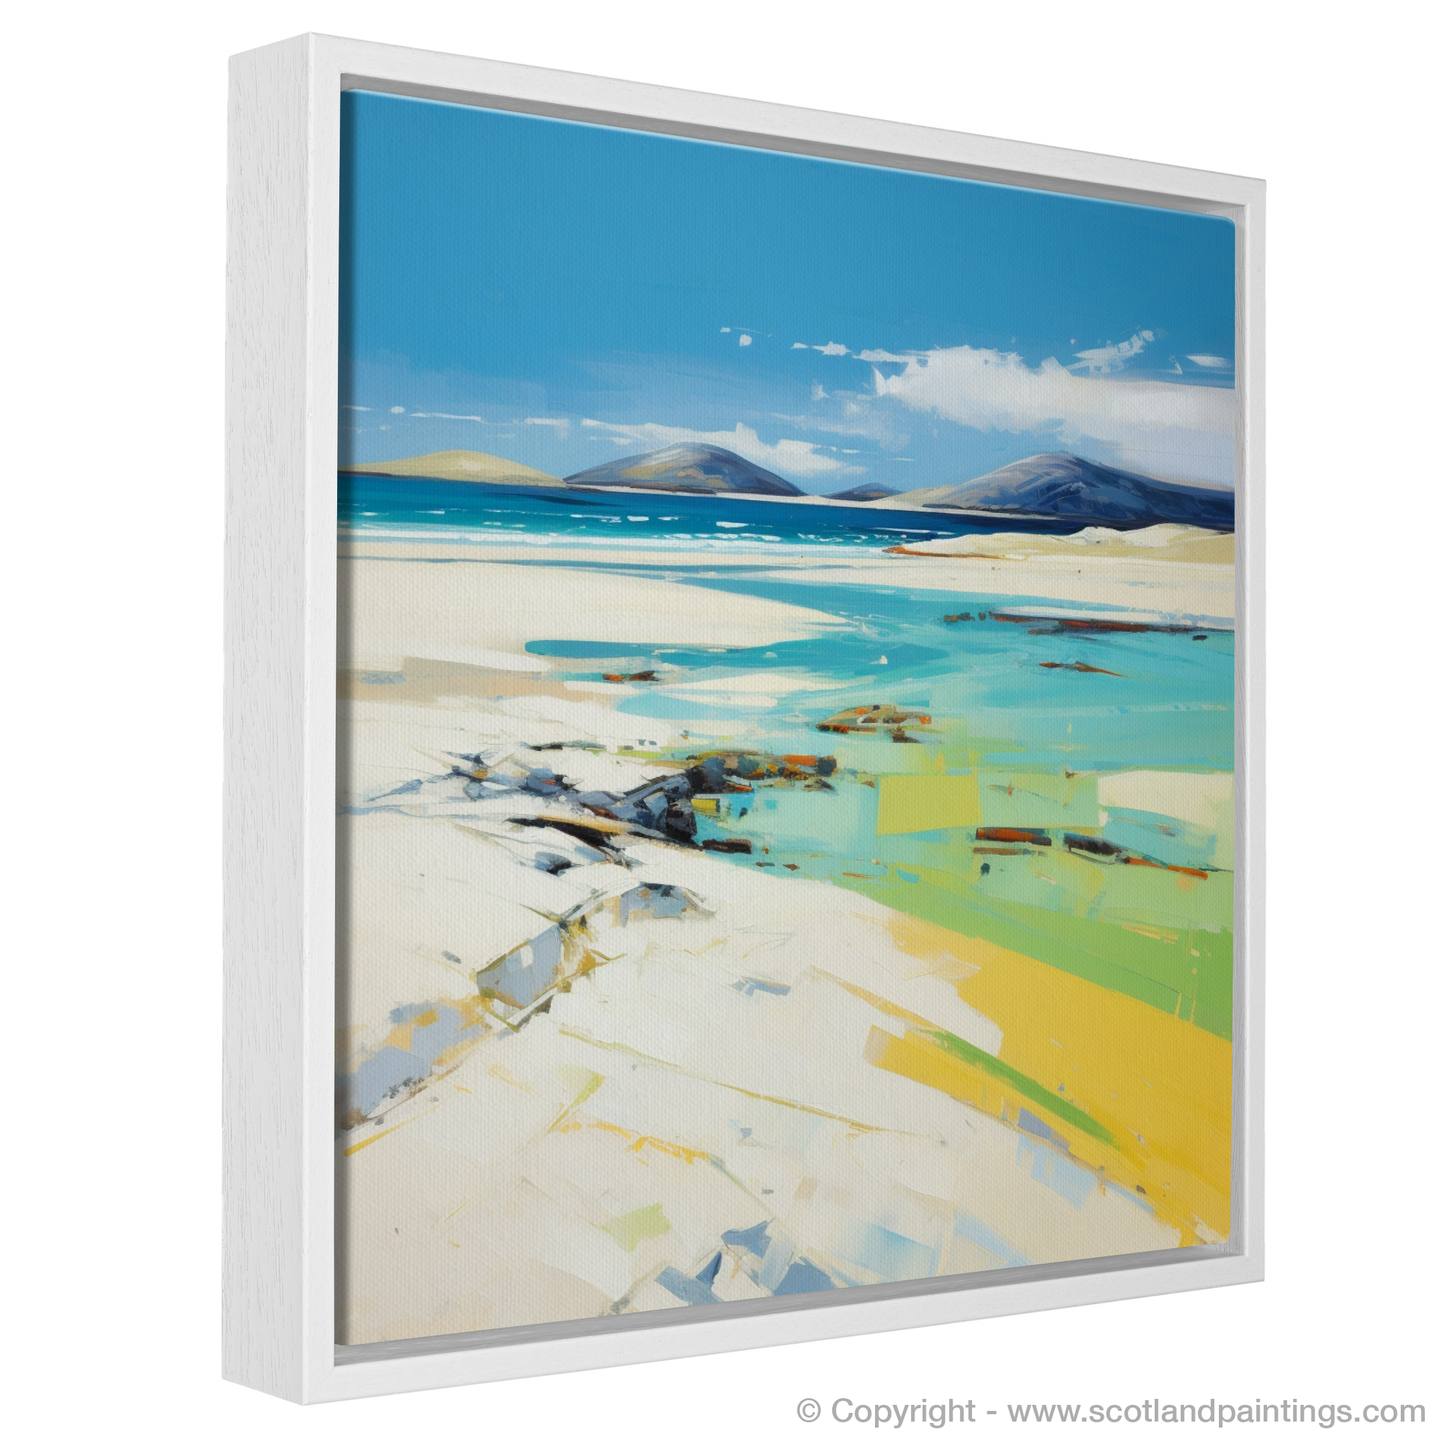 Painting and Art Print of Luskentyre Beach, Isle of Harris entitled "Luskentyre Beach Reverie: A Contemporary Homage to Scottish Shores".